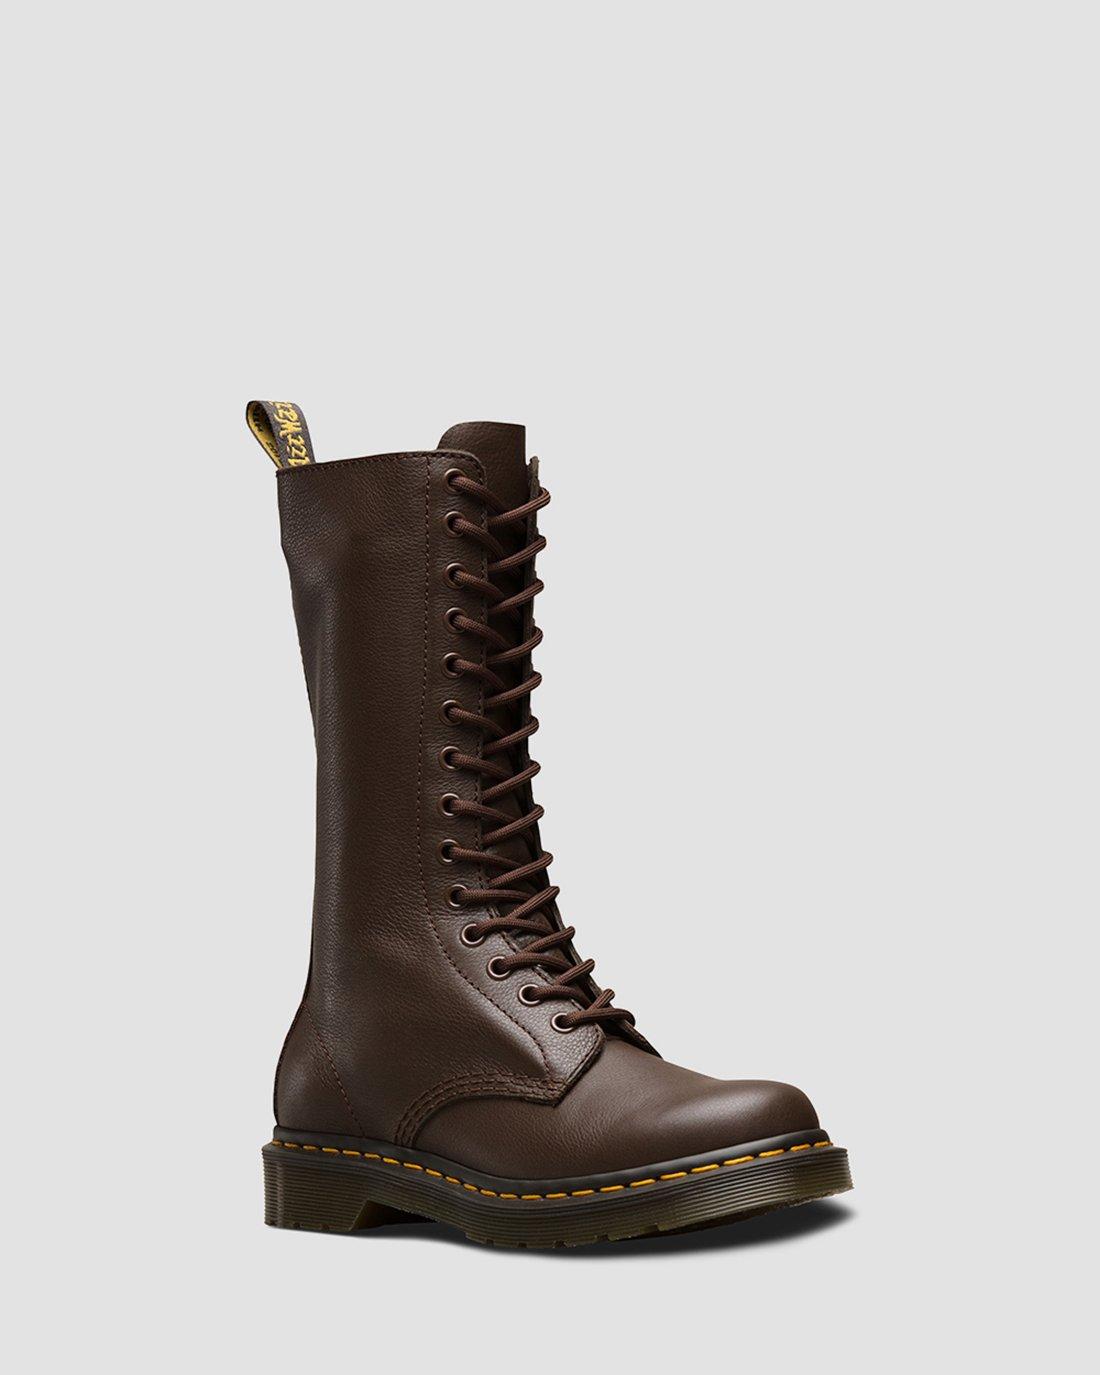 1B99 Virginia Leather Mid Calf Boots | Dr. Martens